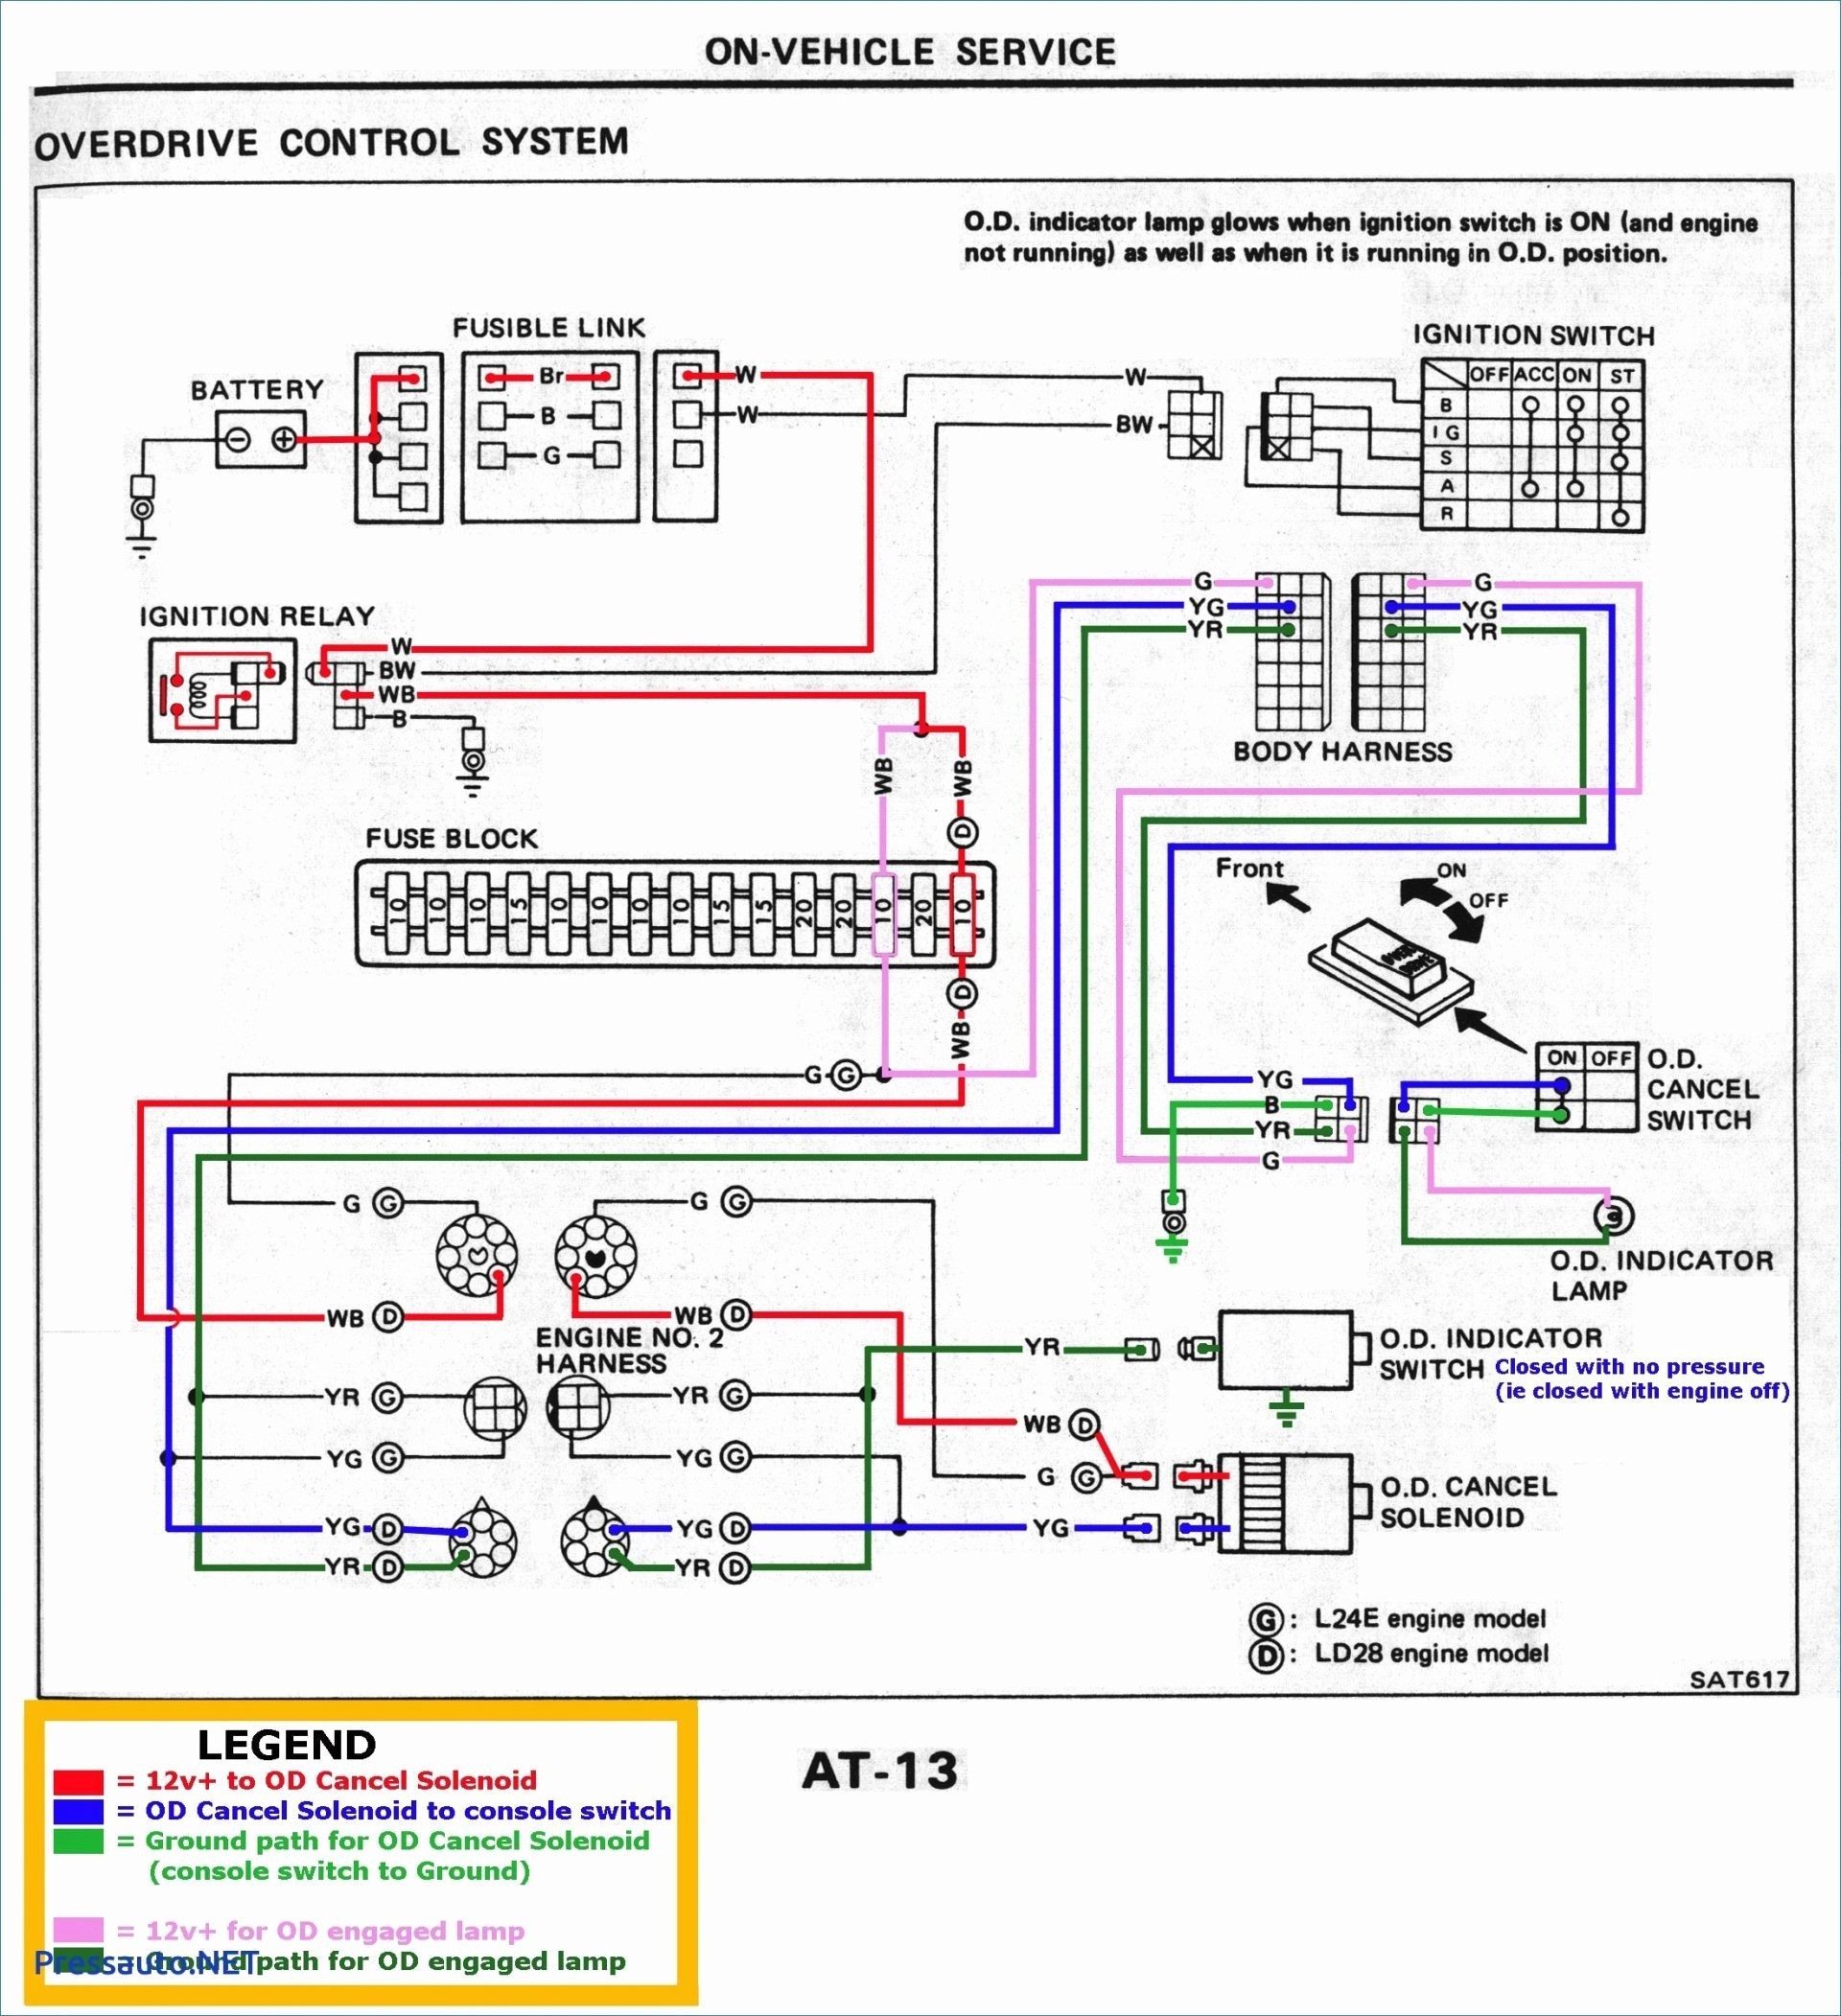 Marine Diesel Engine Cooling System Diagram Dodge Ram Wheelbase Chart Lovely Electrical Wiring Circuits Diesel Of Marine Diesel Engine Cooling System Diagram